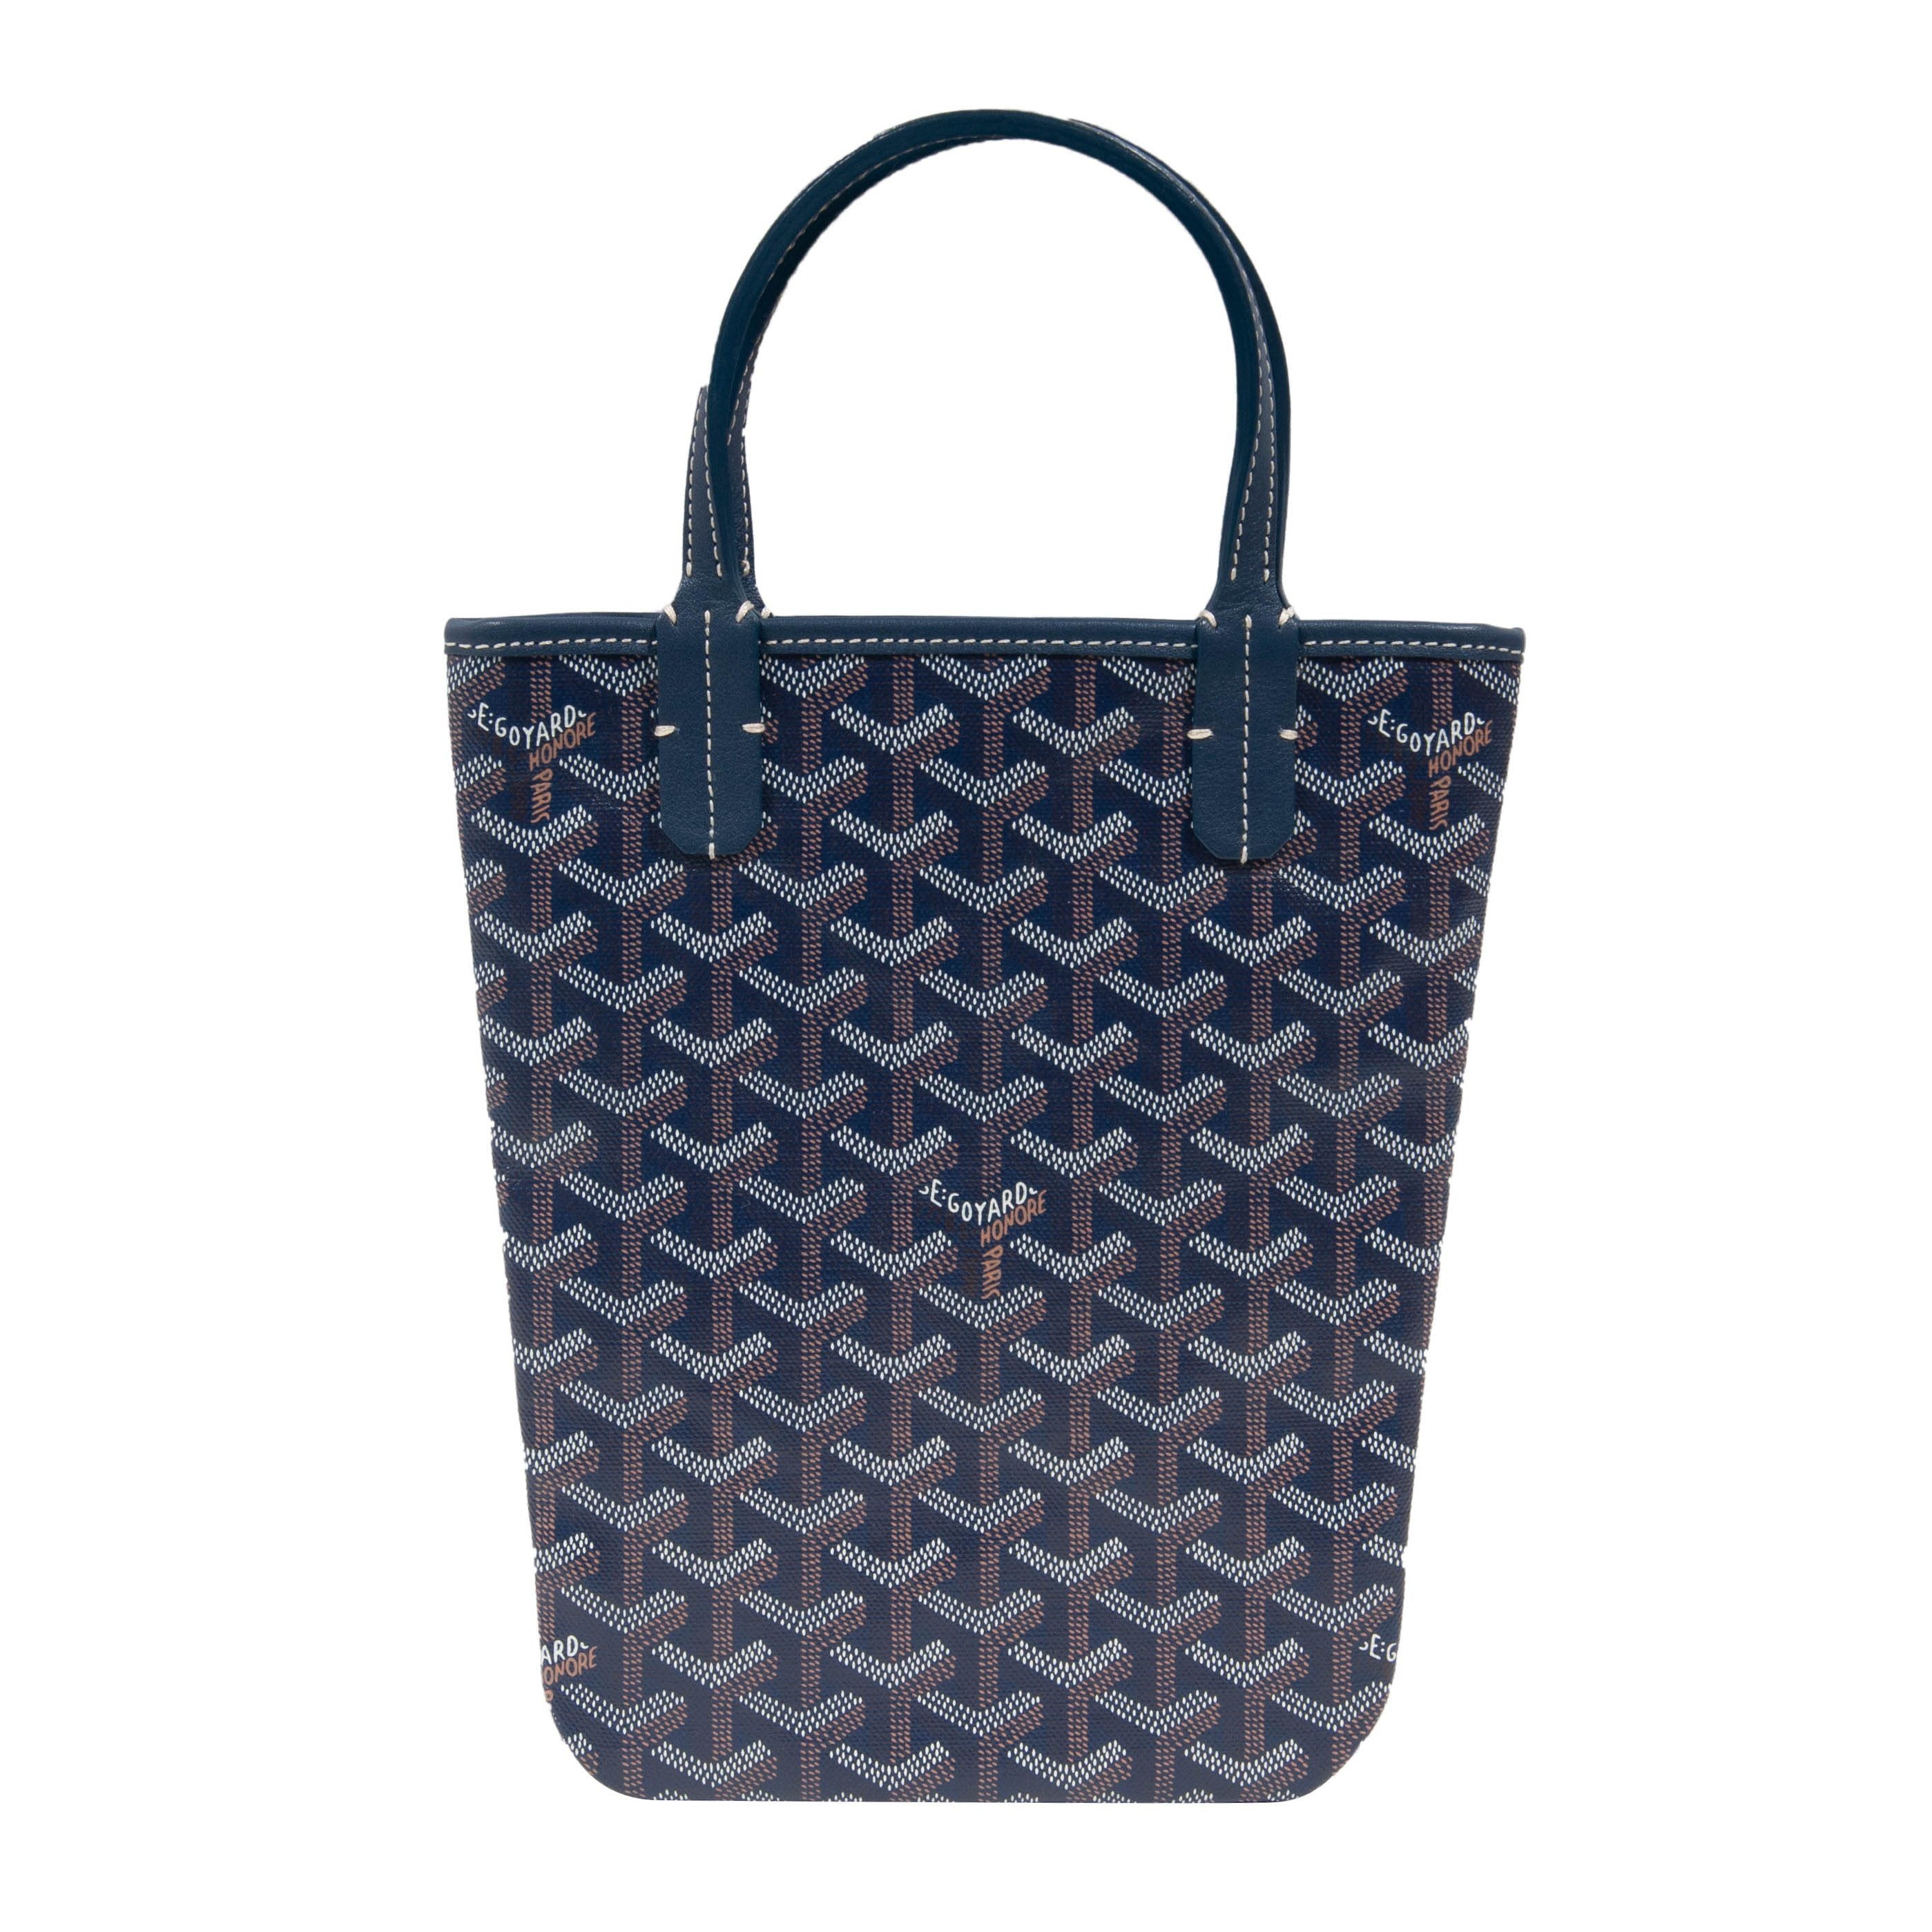 GOYARD Poitiers LIMITED EDITION !! Bags